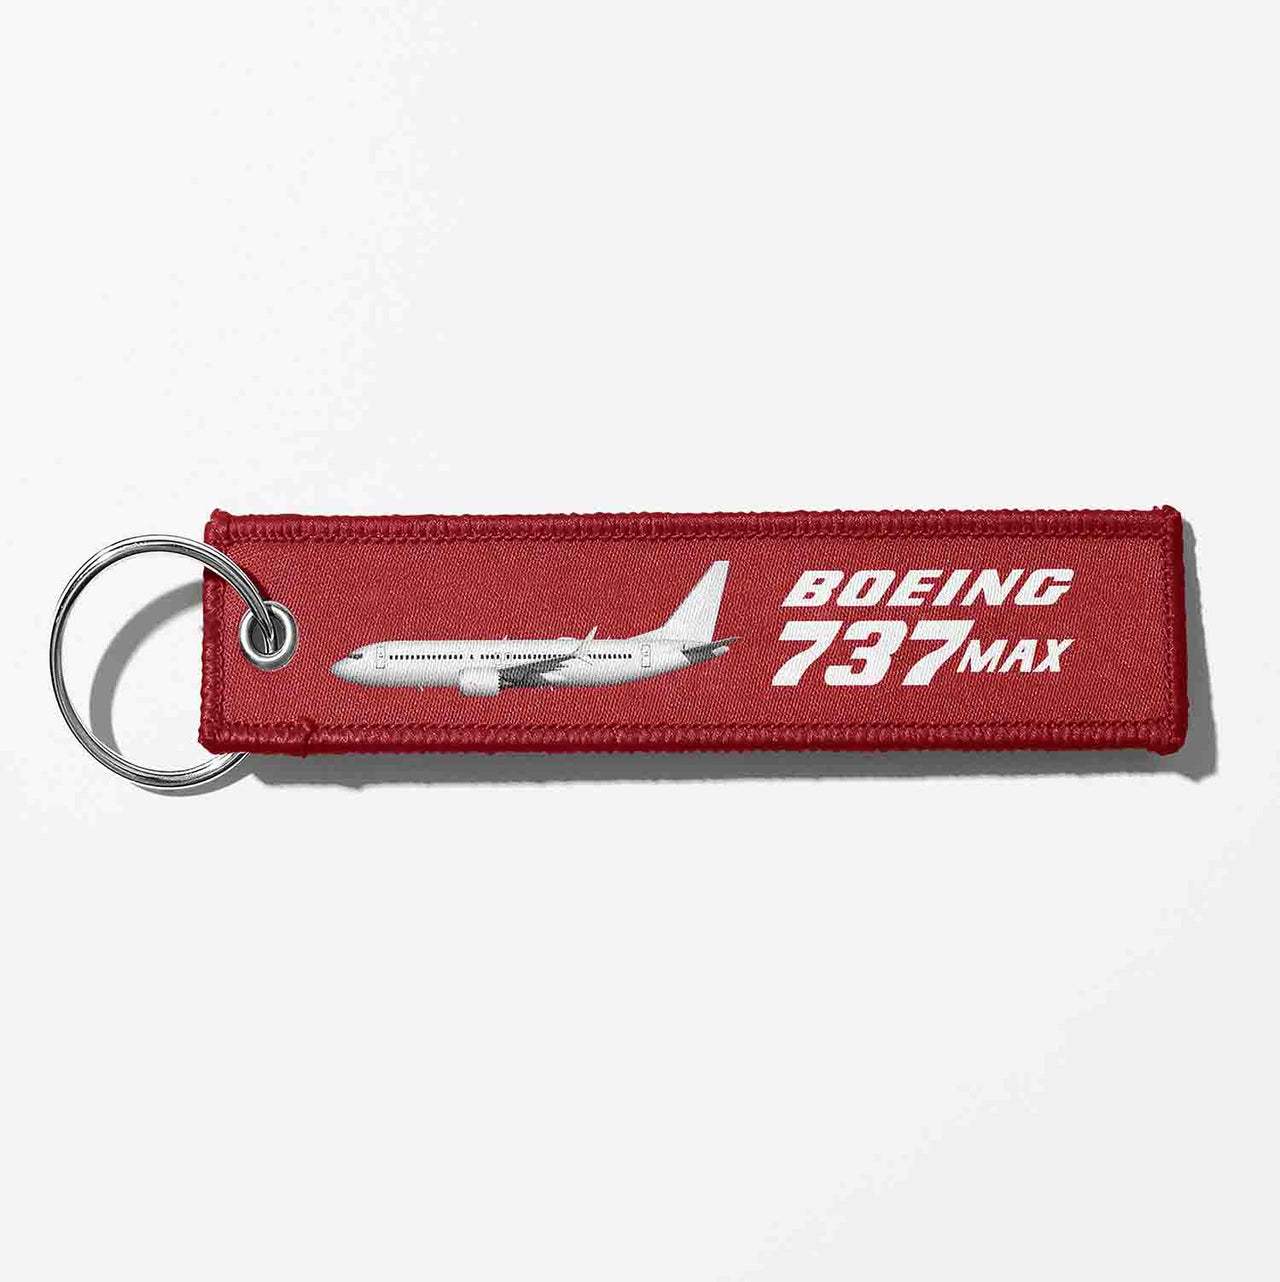 The Boeing 737Max Designed Key Chains